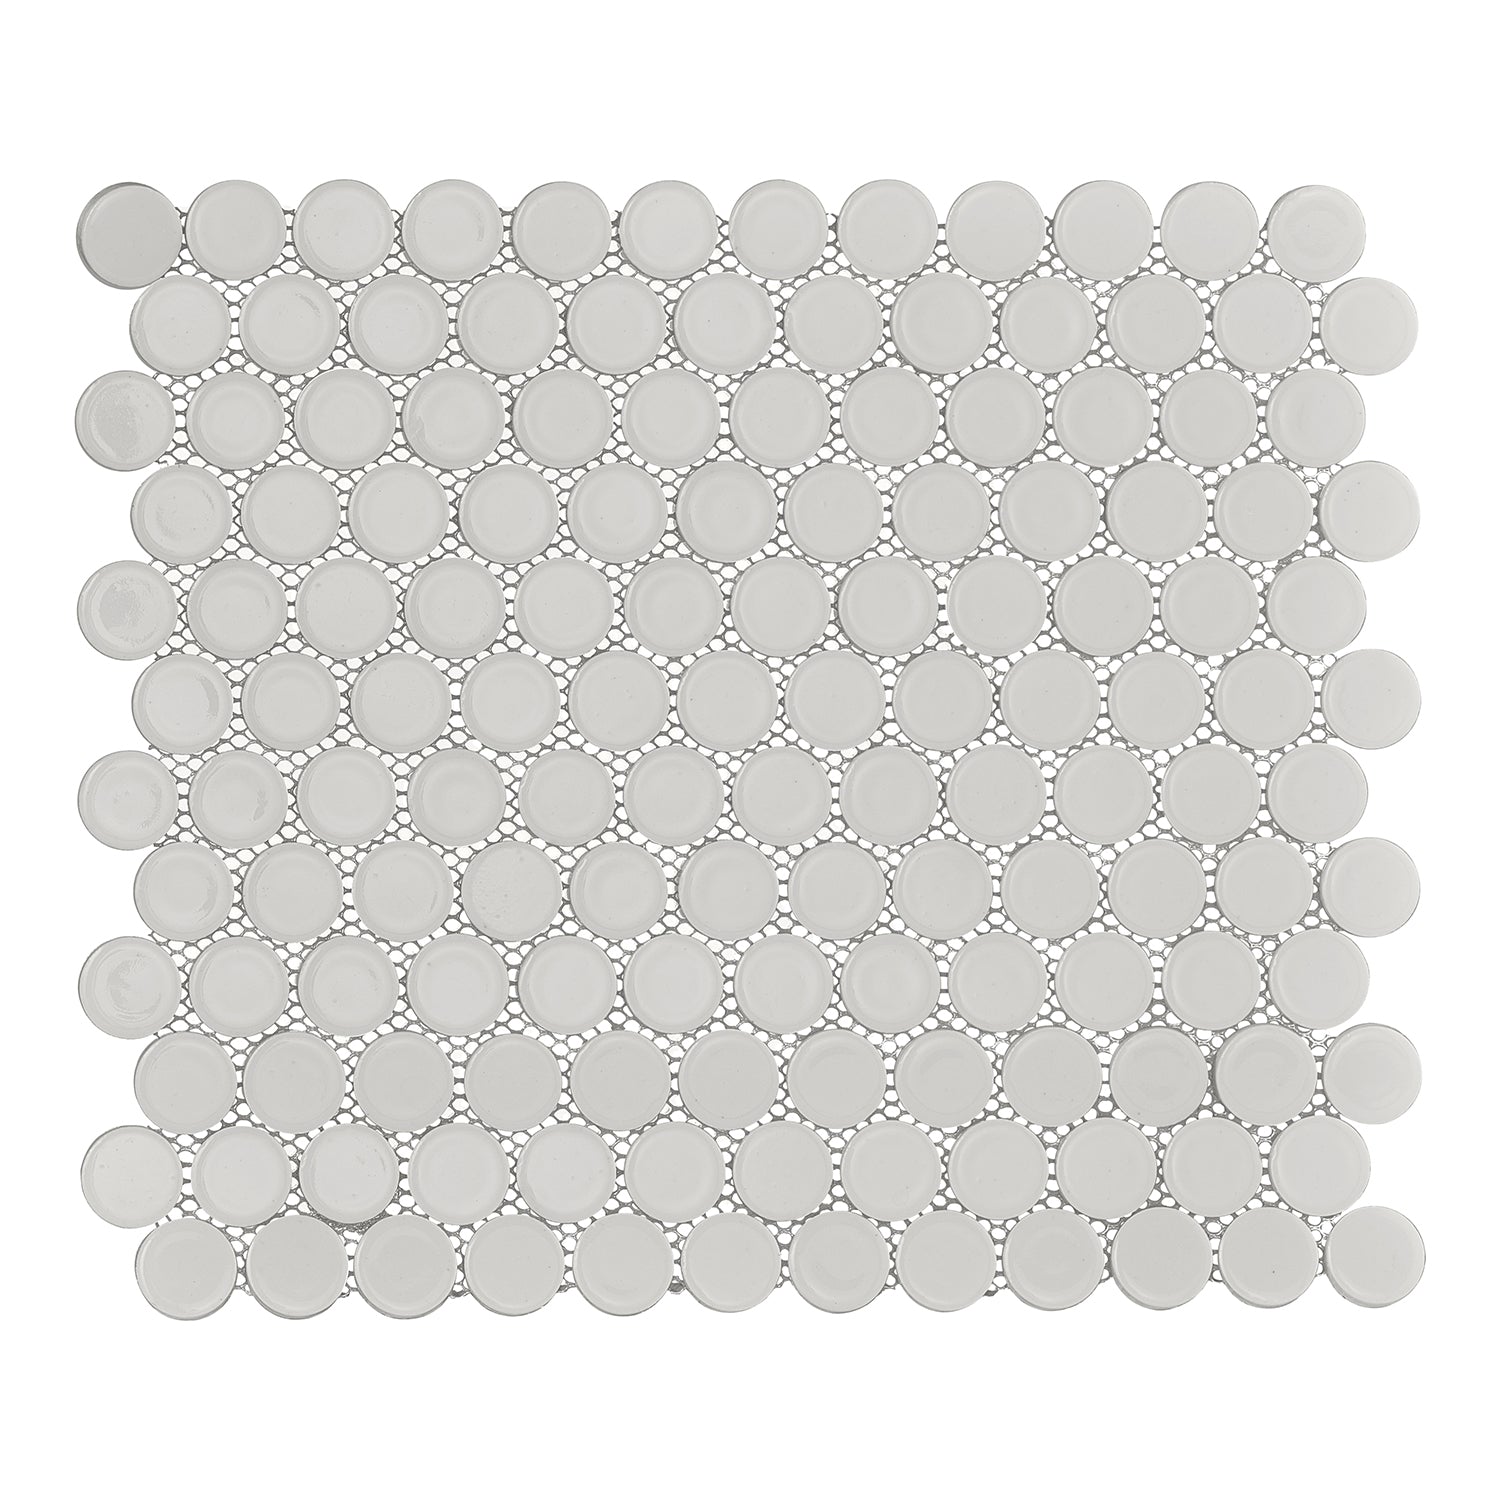 Huelva Glass Penny Mosaic Floor and Wall Tile in White